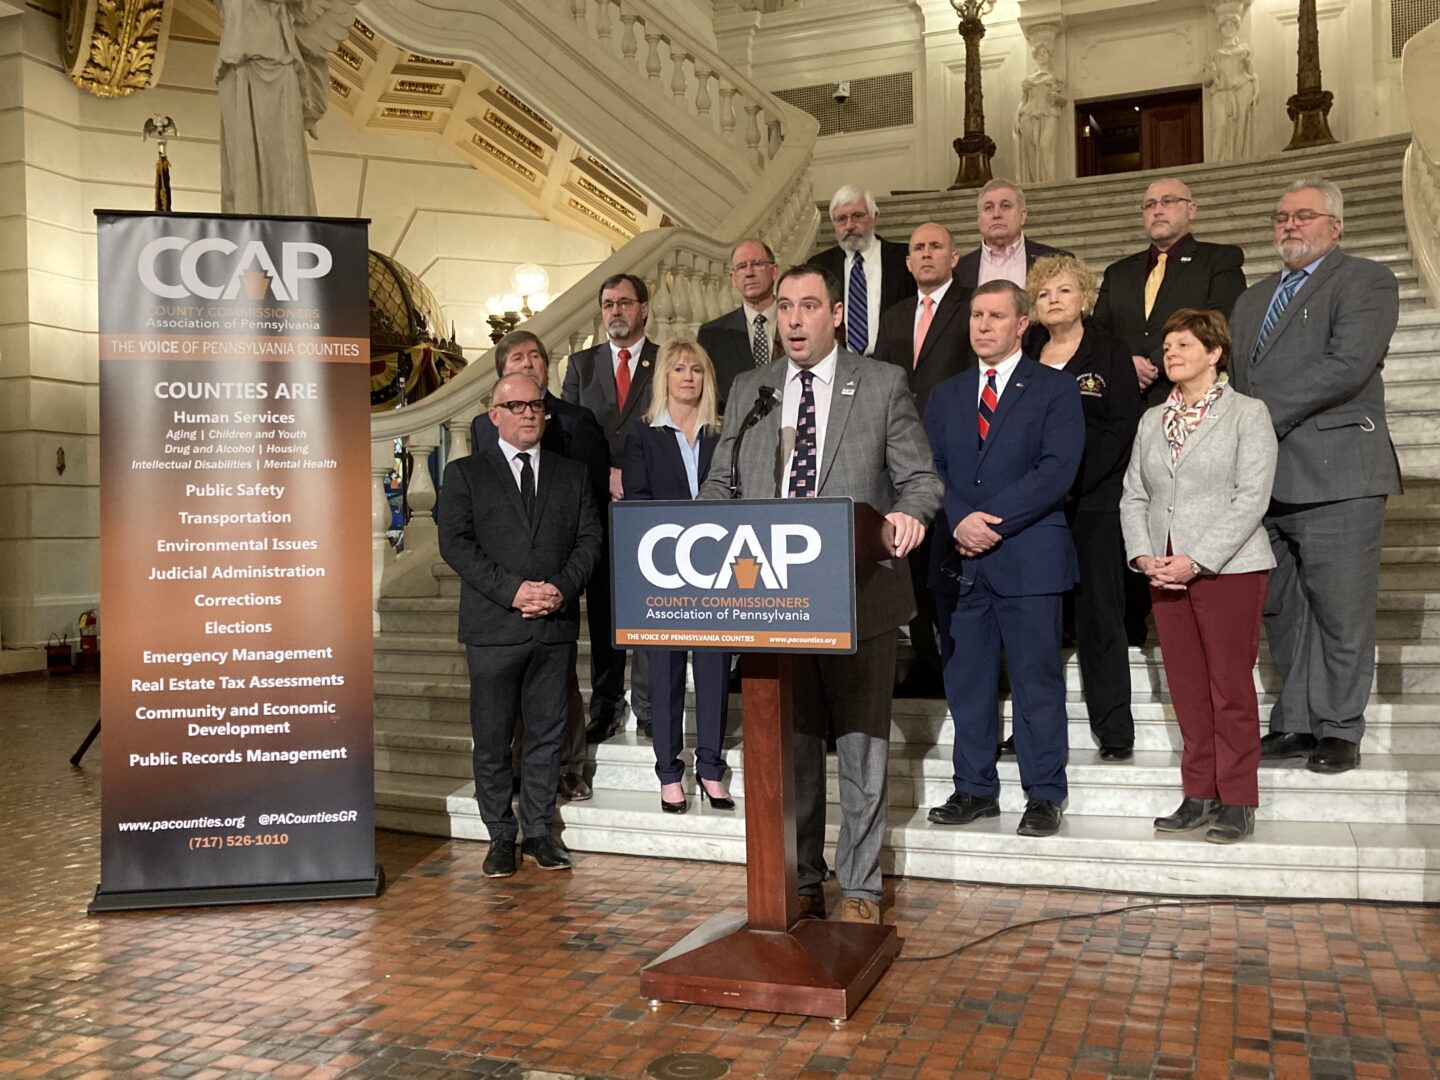 Pennsylvania Association of County Commissioners President Chip Abramovich, accompanied by other county commissioners, speaks at a press conference in Harrisburg on Jan. 25, 2023.